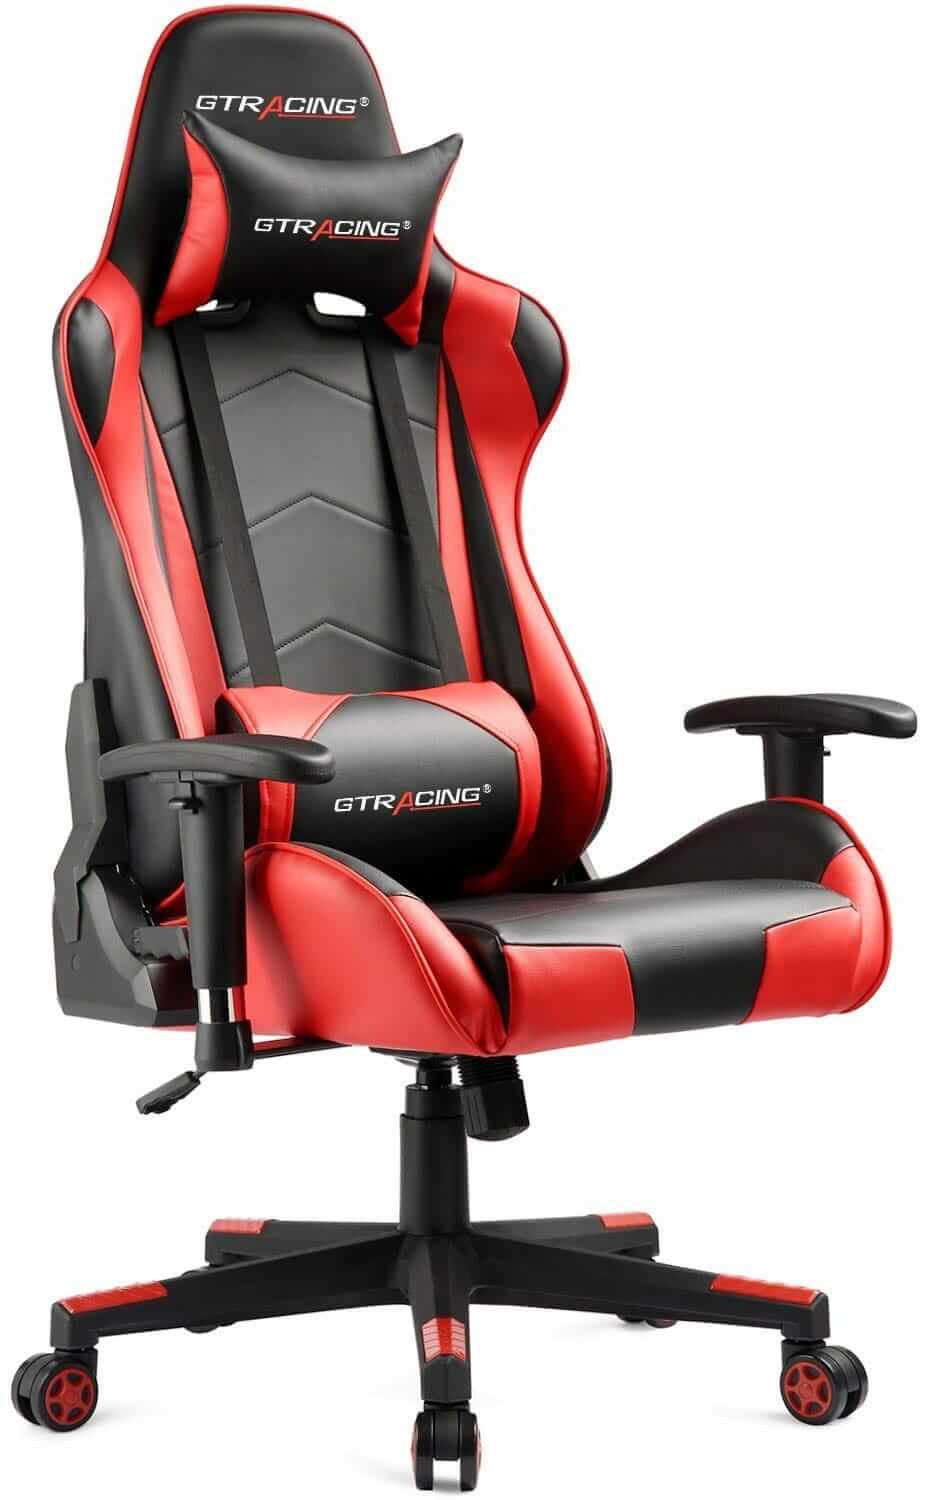 Grey Ergonomic Video Gaming Office Chair PU Leather Bucket Seat Racing Desk Red Chairs with Lumbar Support 3-Years Warranty 